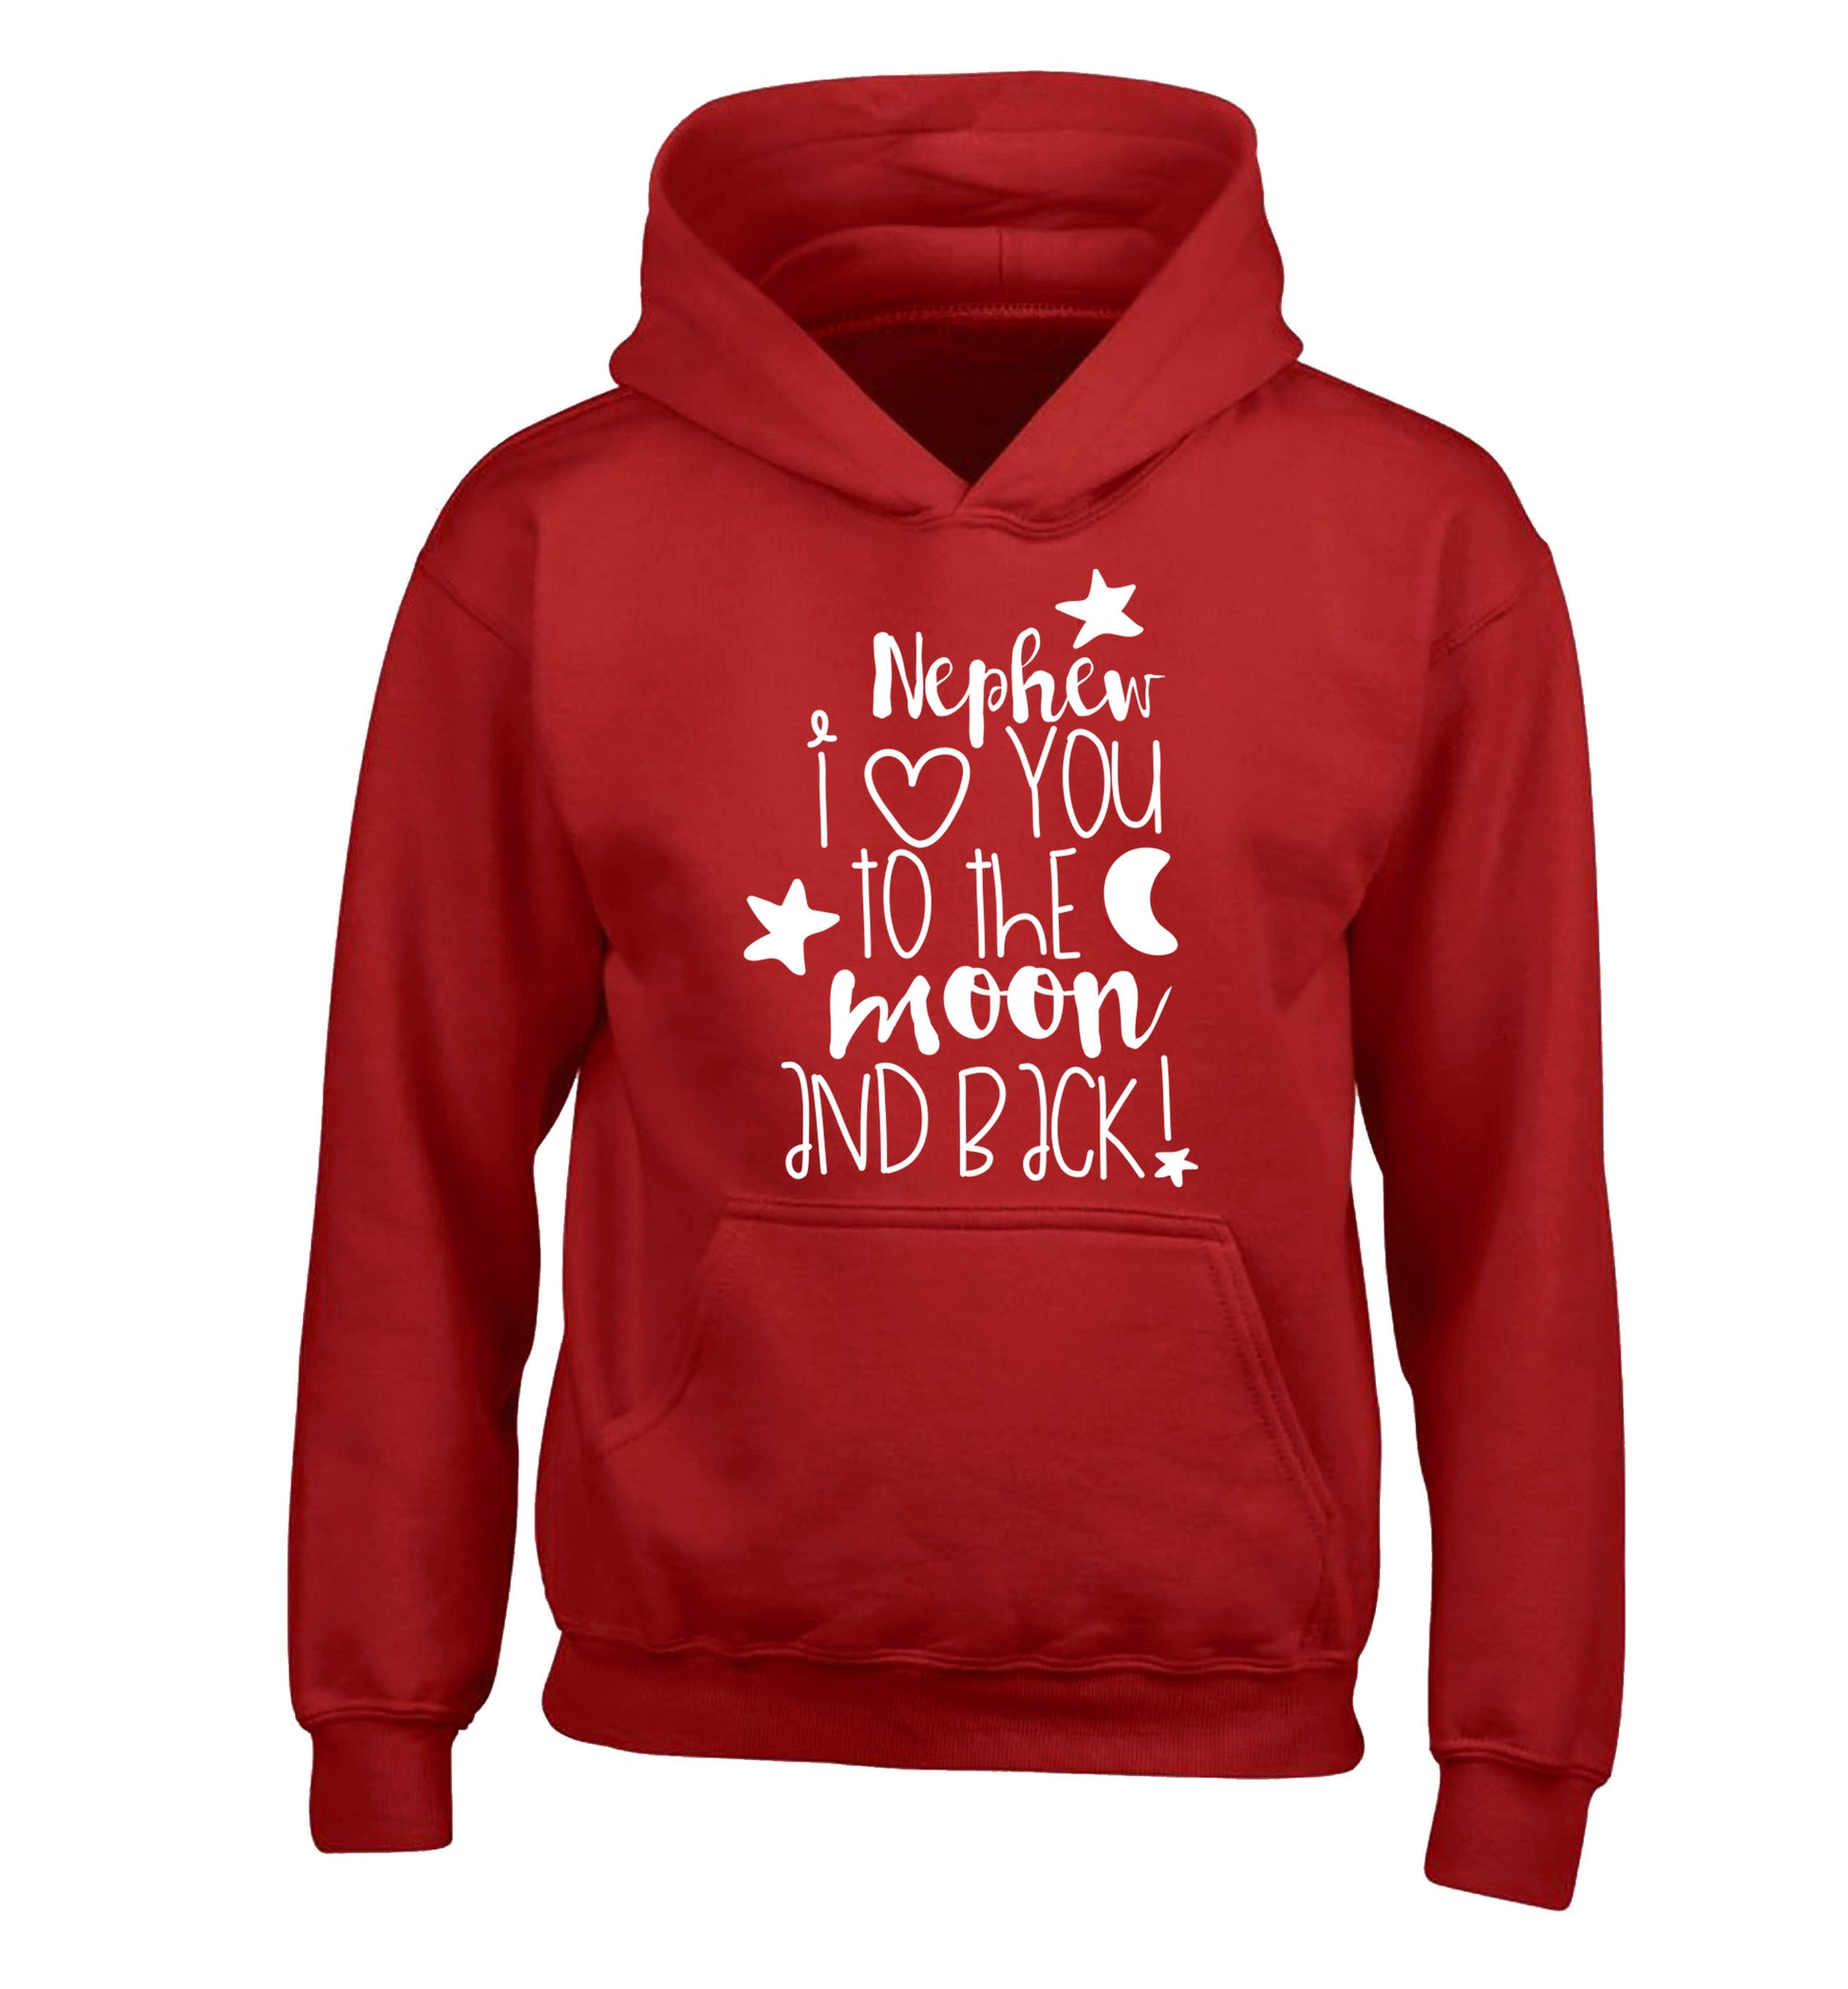 Nephew I love you to the moon and back children's red hoodie 12-14 Years